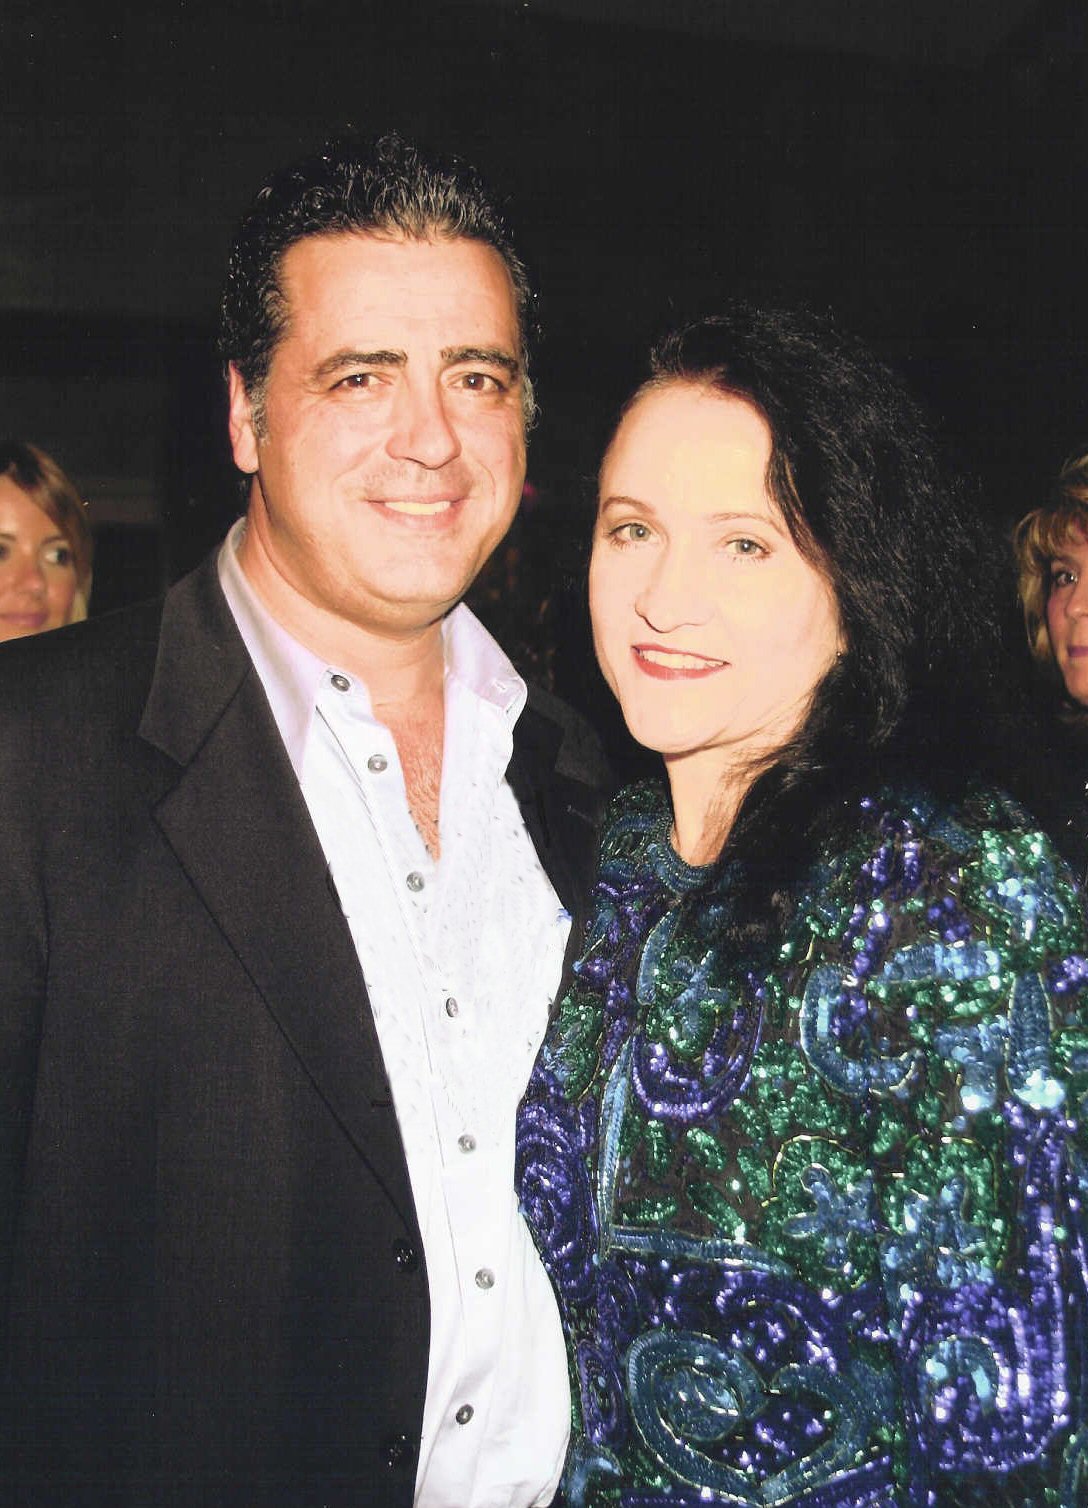 with John Fiore of The Sopranos, at Safe Passage fundraiser at the Jim Myron estate in Hollywood, 2005